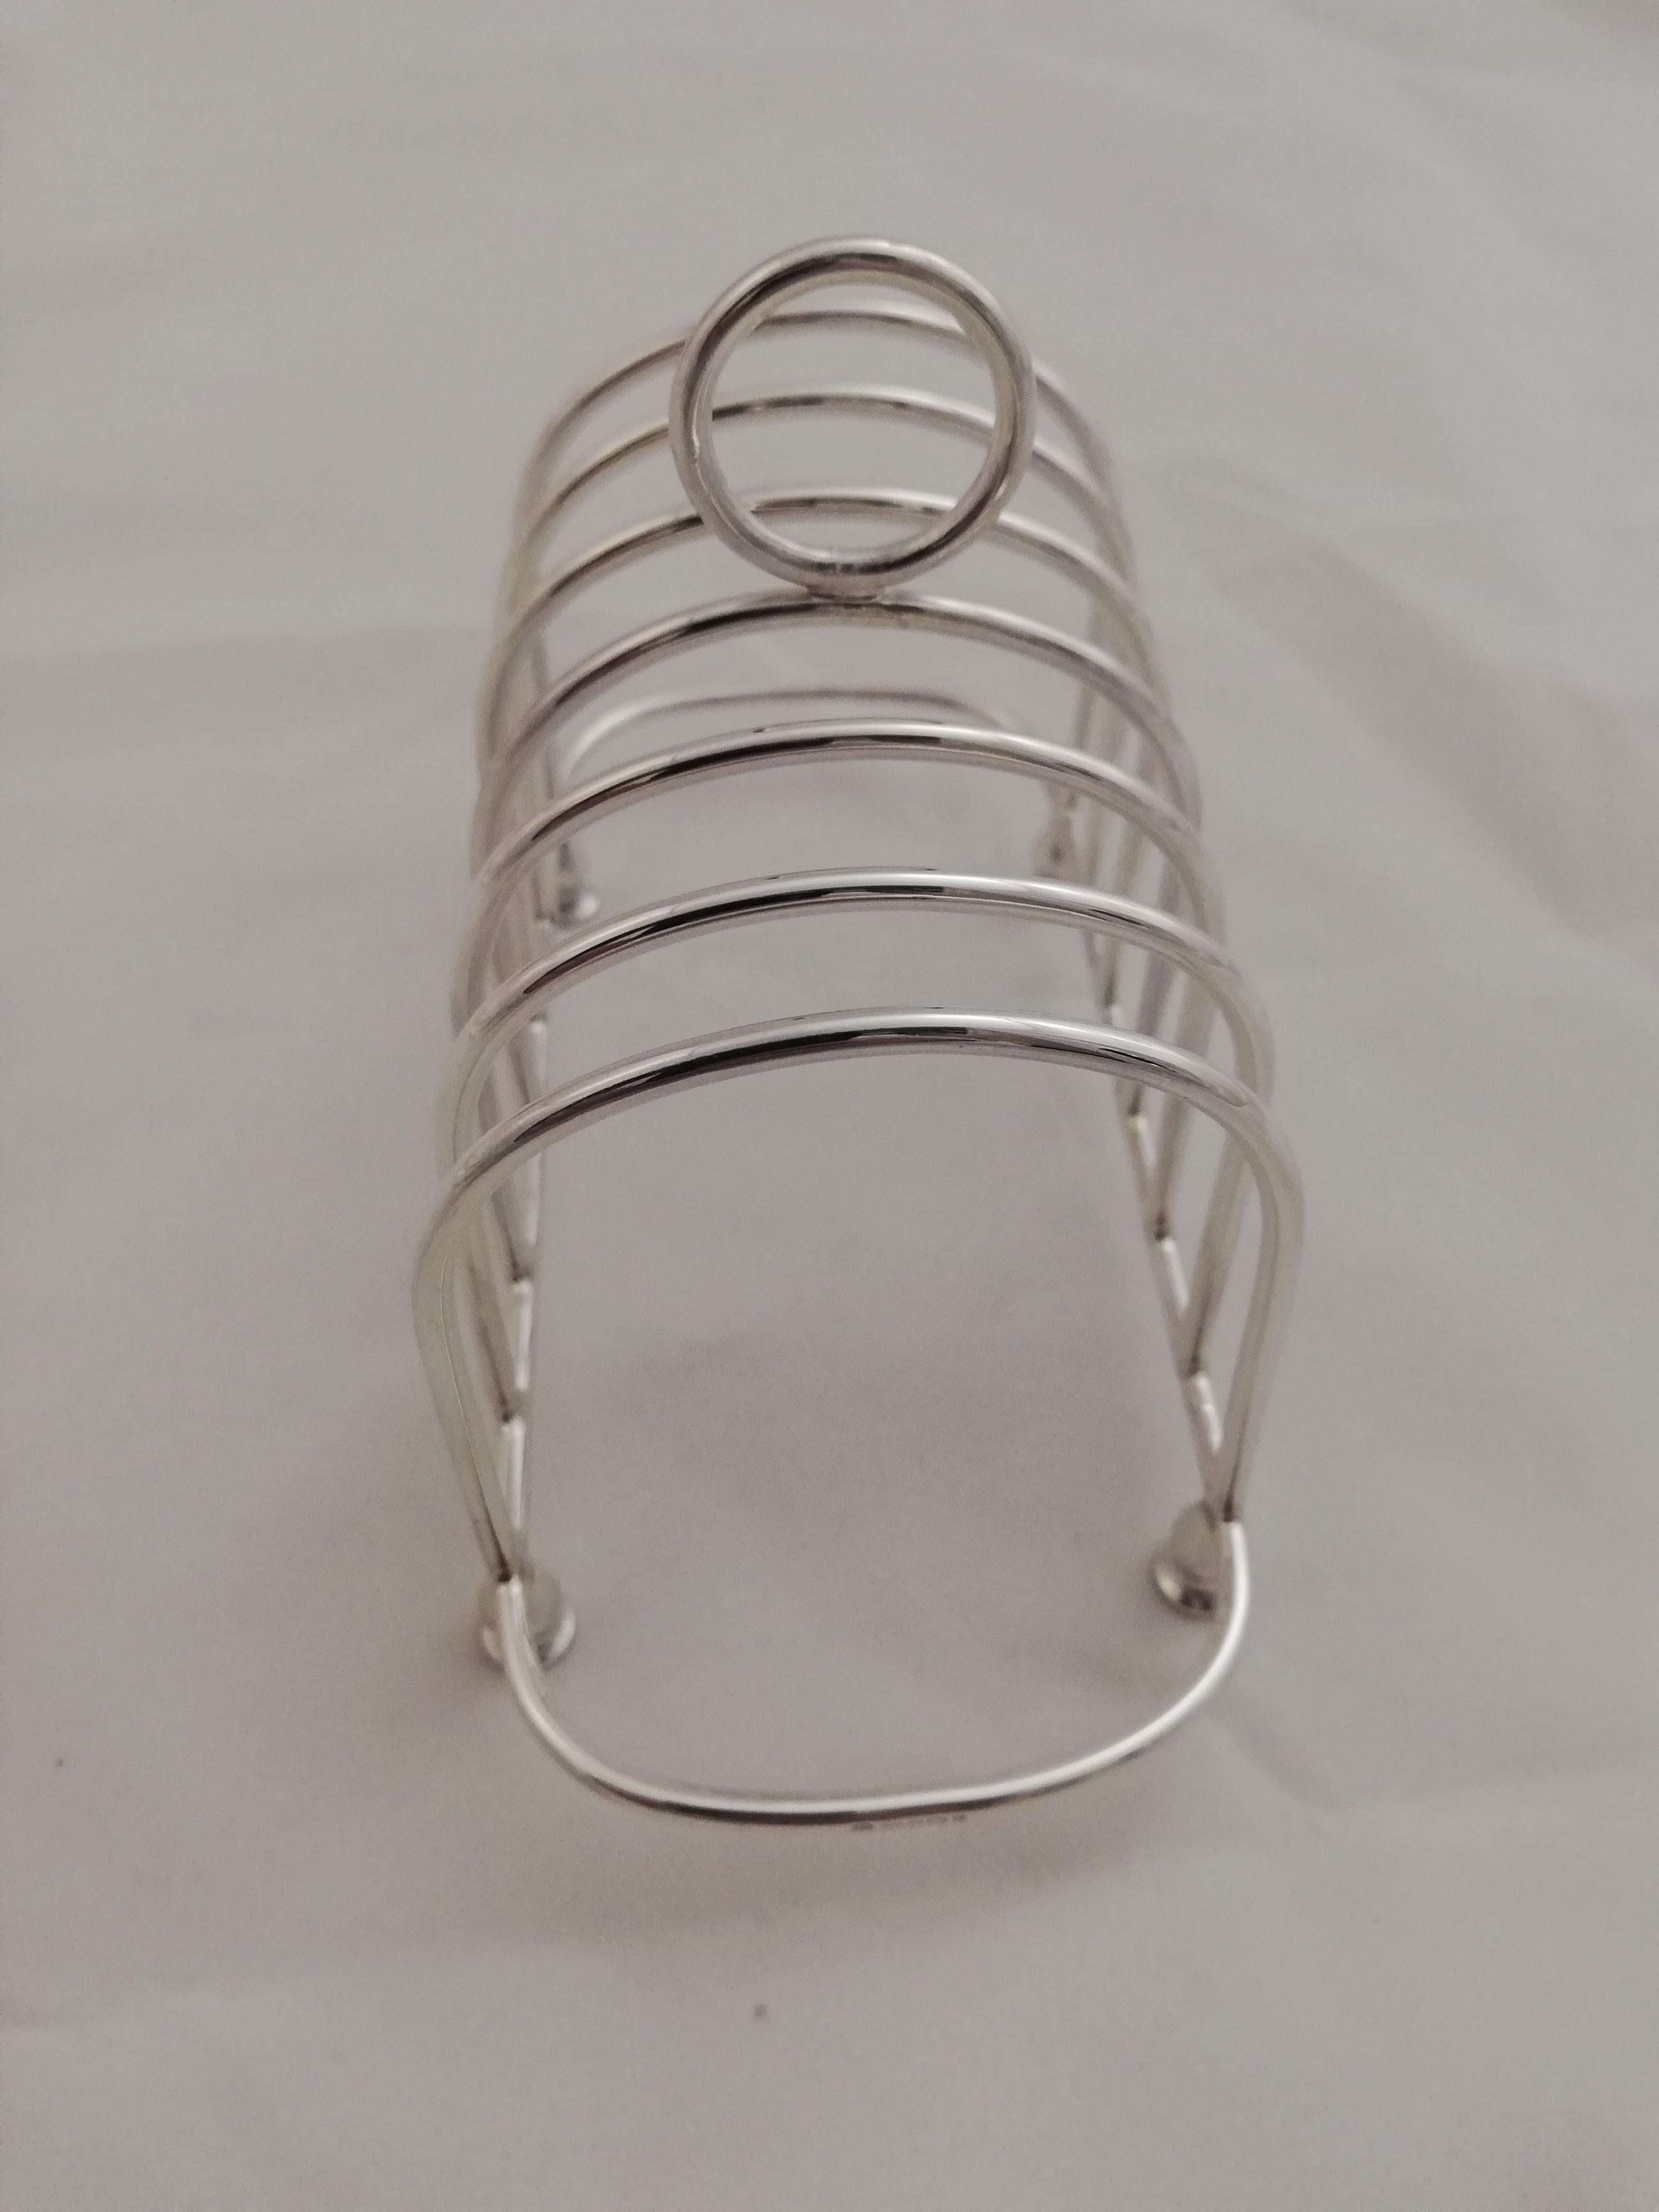 This handy, sterling silver toast rack is usable up to 6 slices. Of course it would also be suitable as a napkinholder.
 